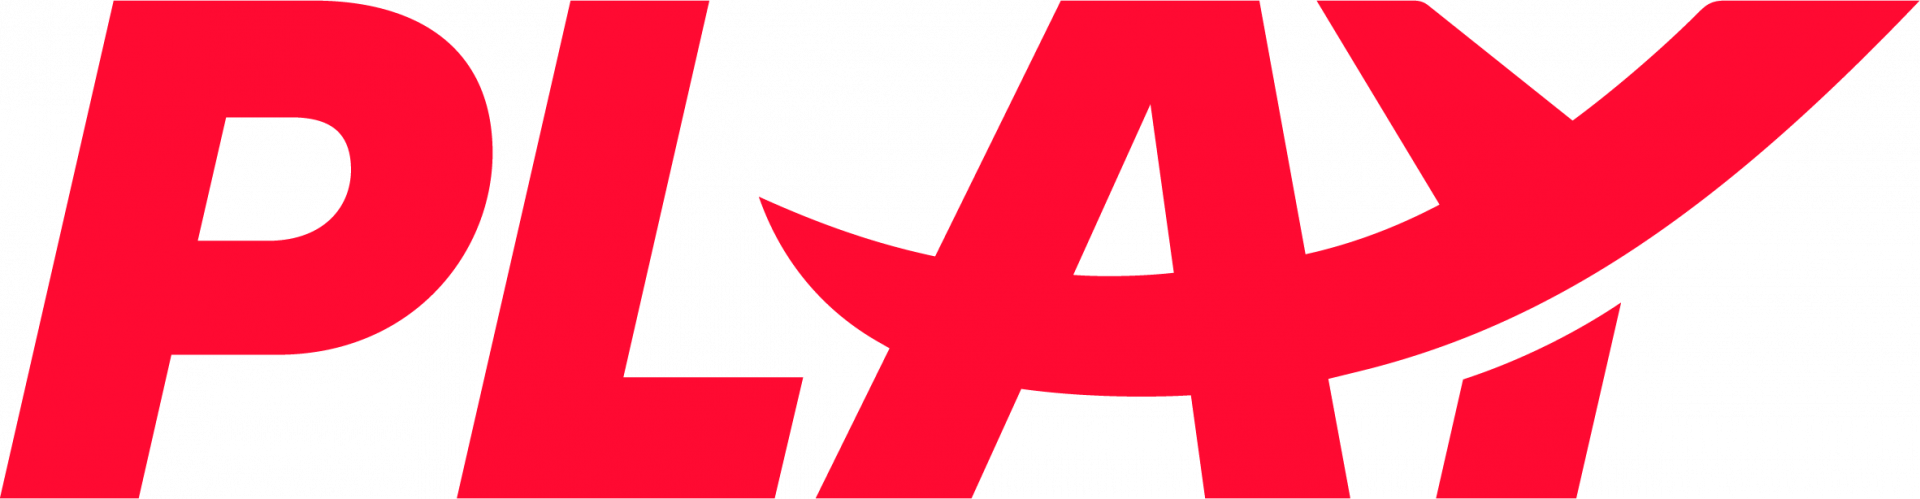 Image of red logo for PLAY Airlines